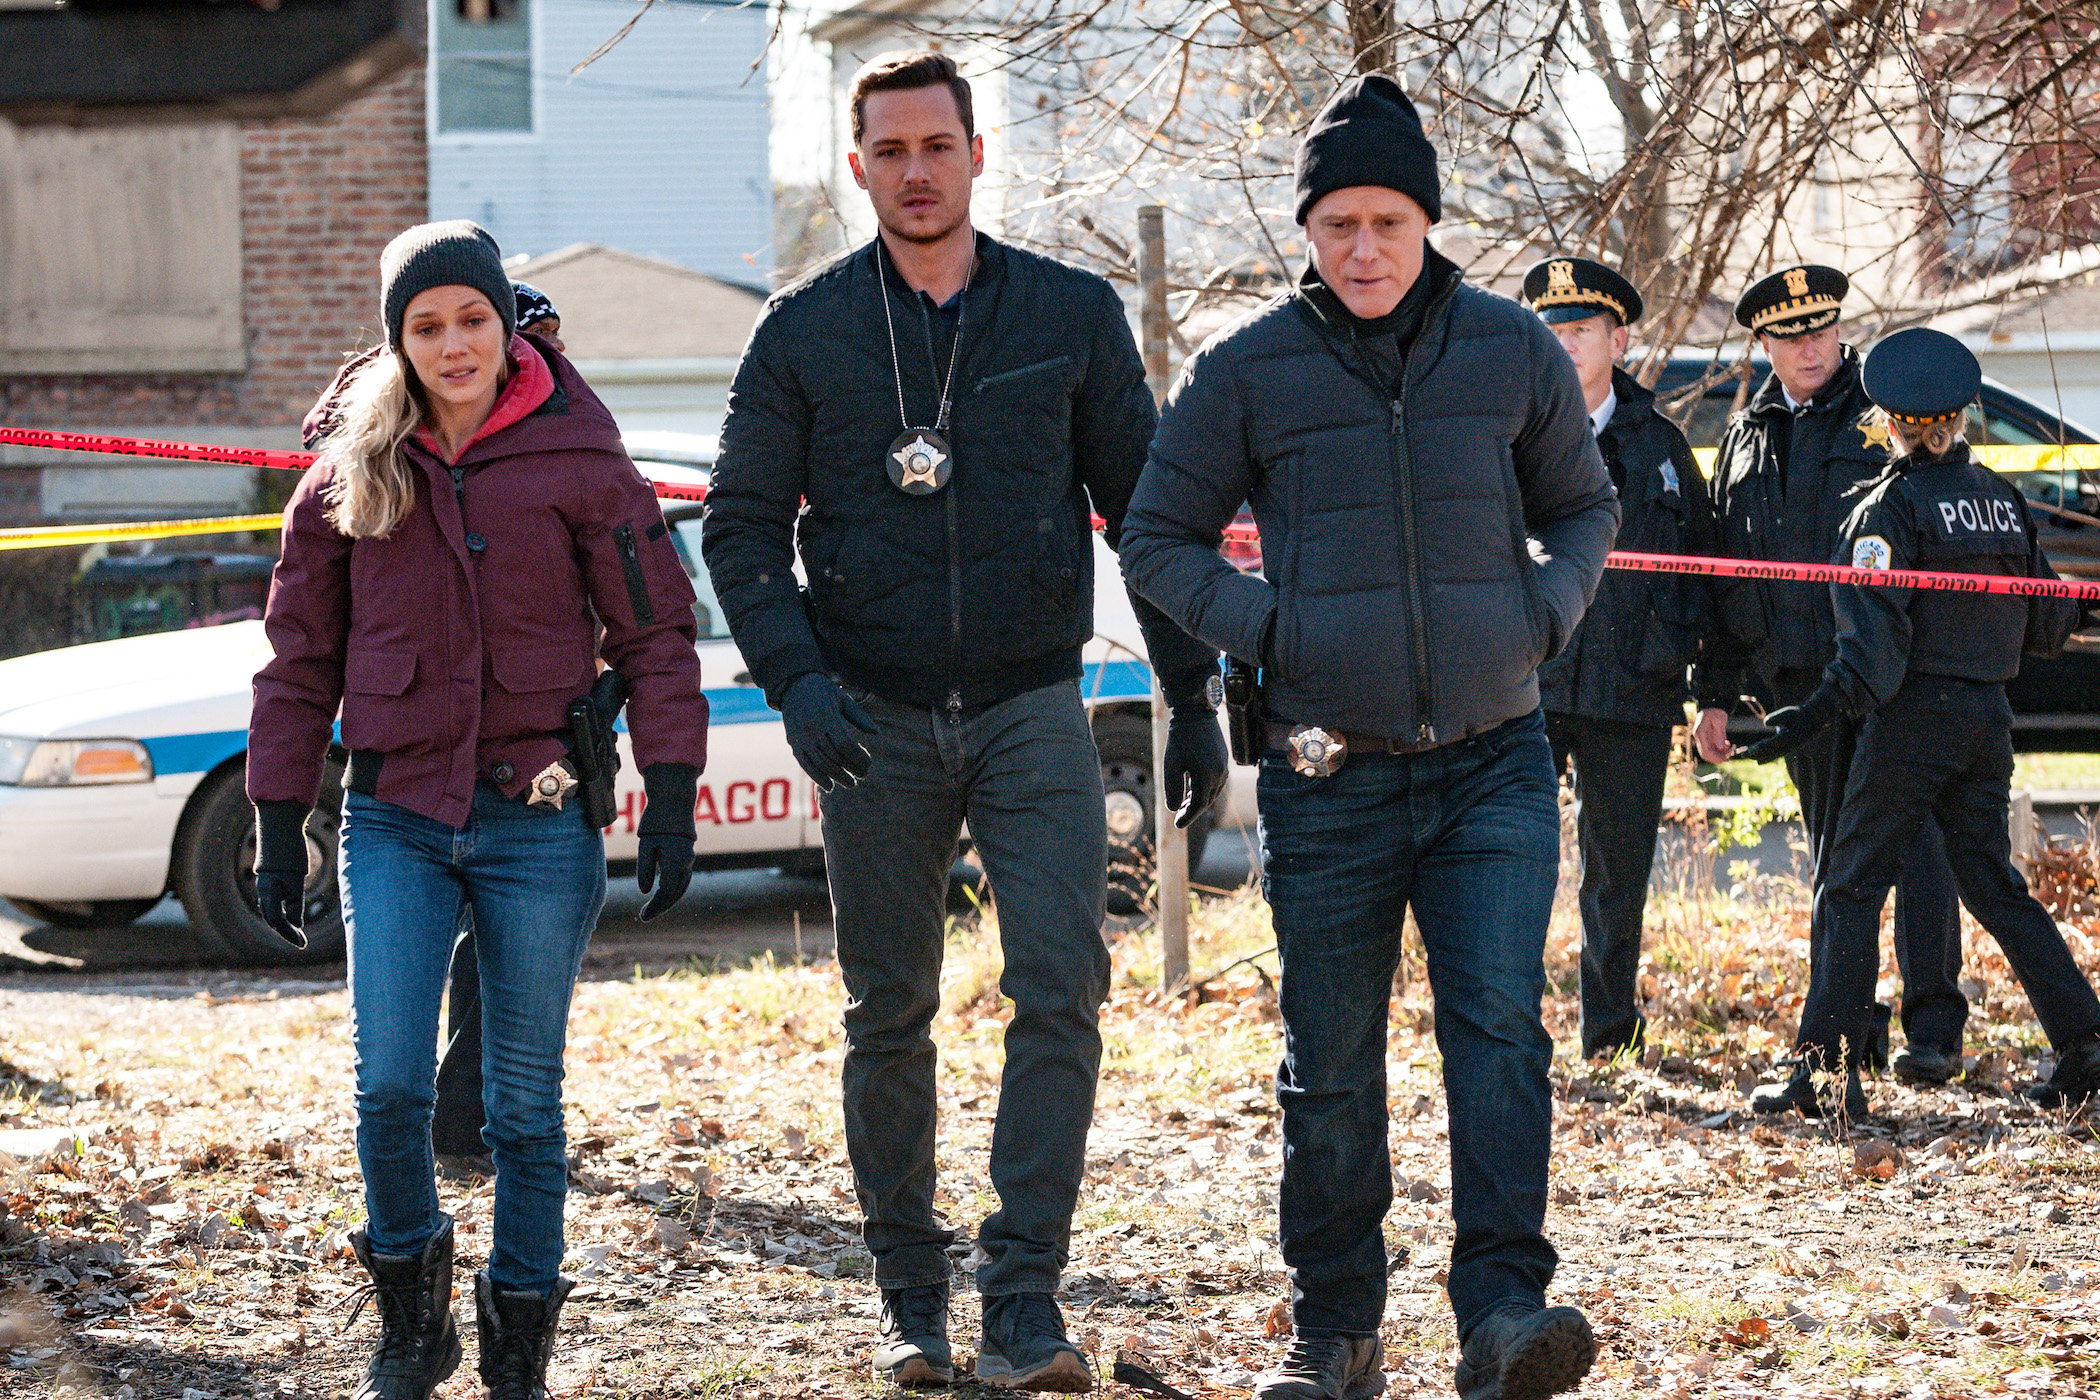 Hailey Upton, Jay Halstead, and Hank Voight from 'Chicago P.D.' Season 9 walking together outside